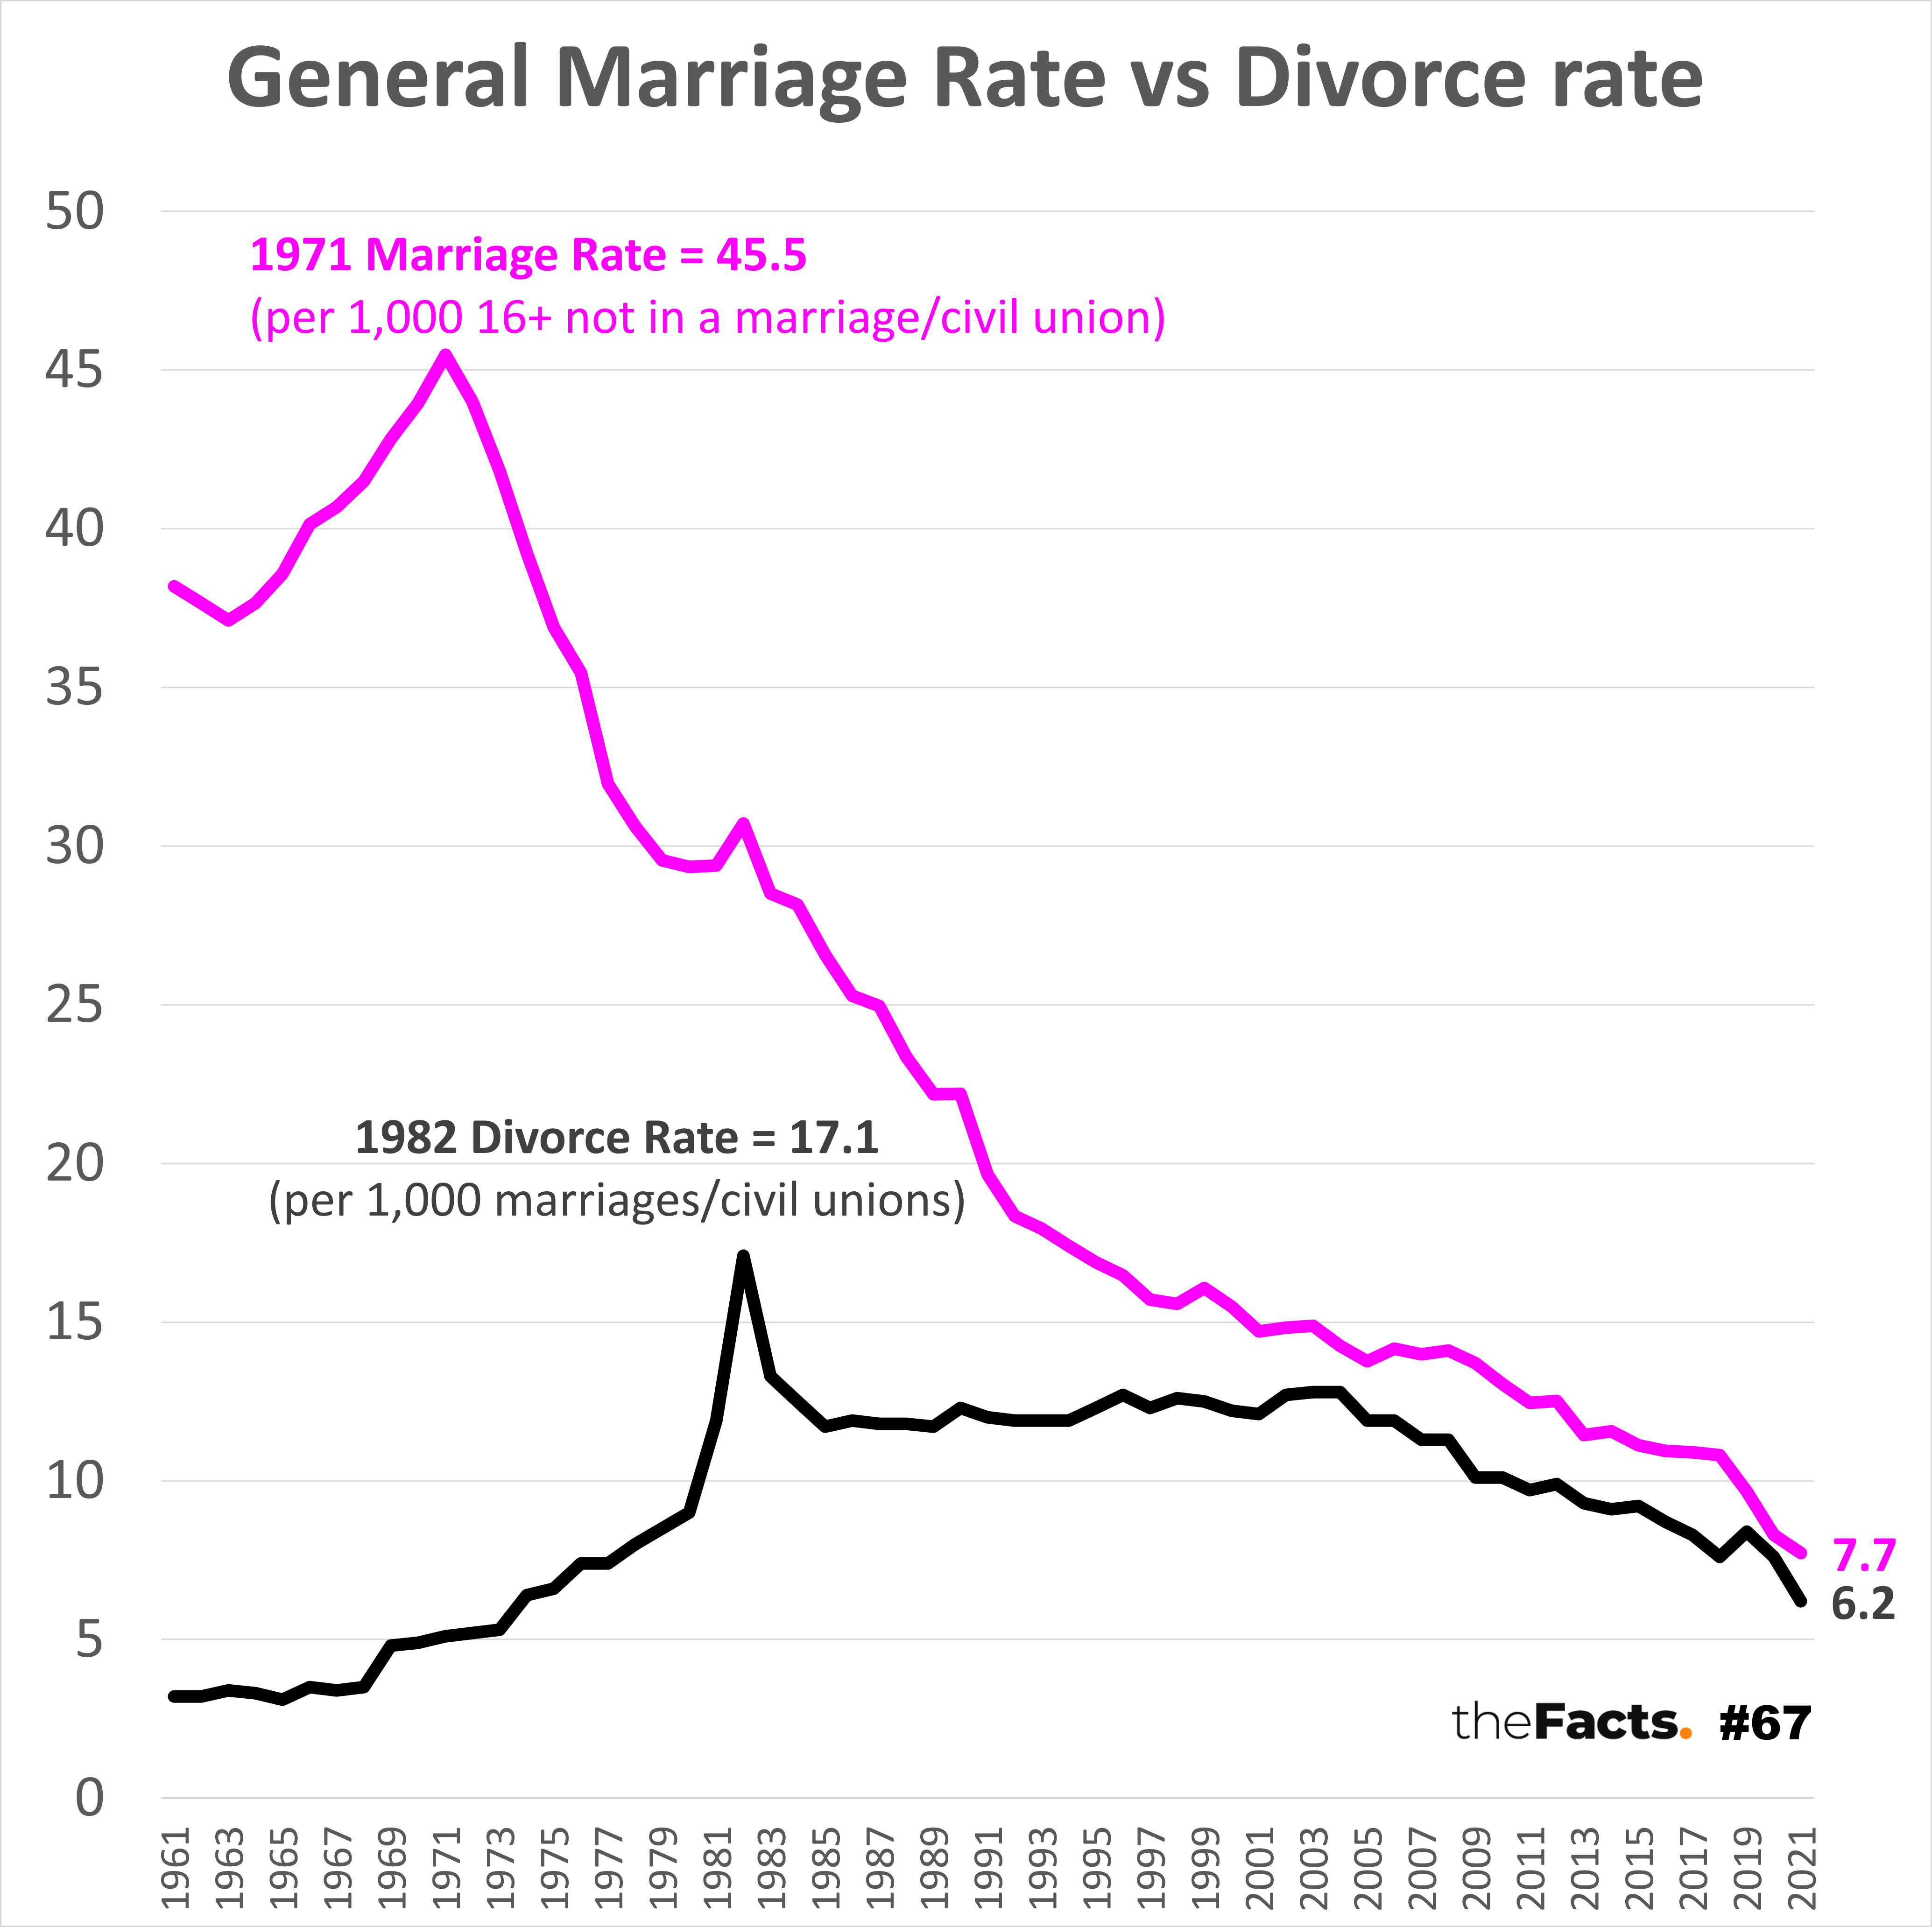 divorce rate of arranged marriages